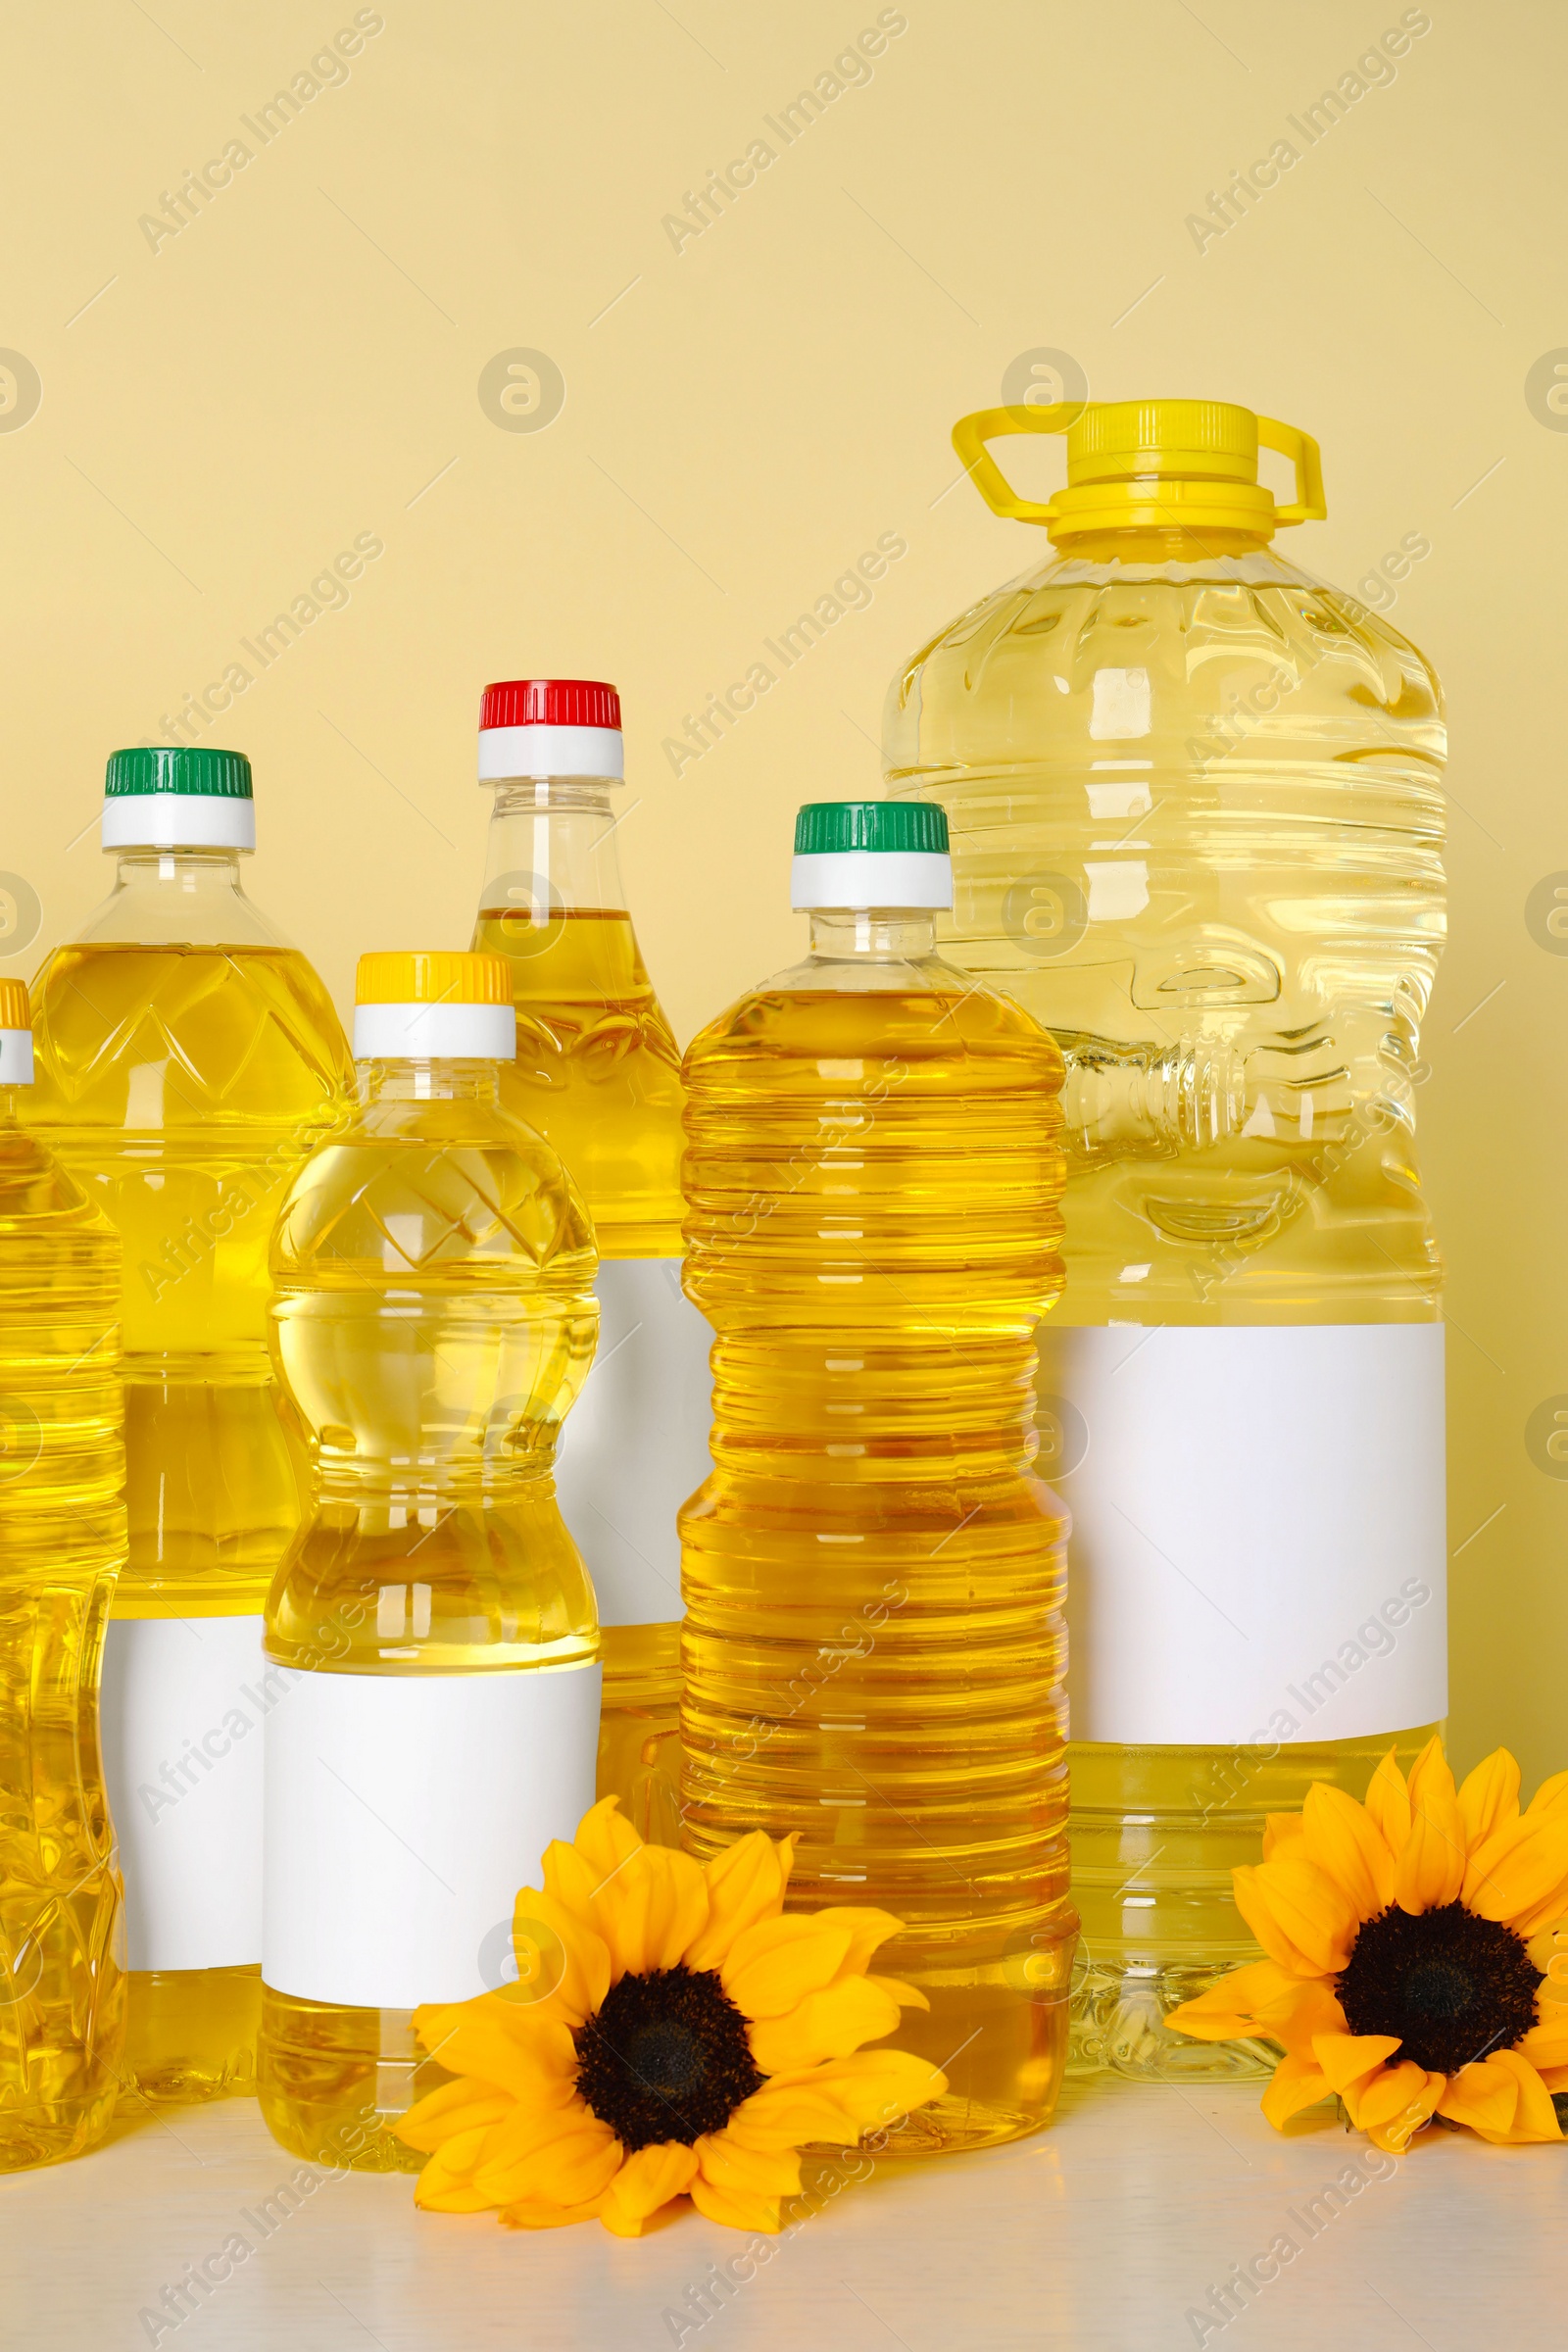 Photo of Bottles of cooking oil and sunflowers on white table